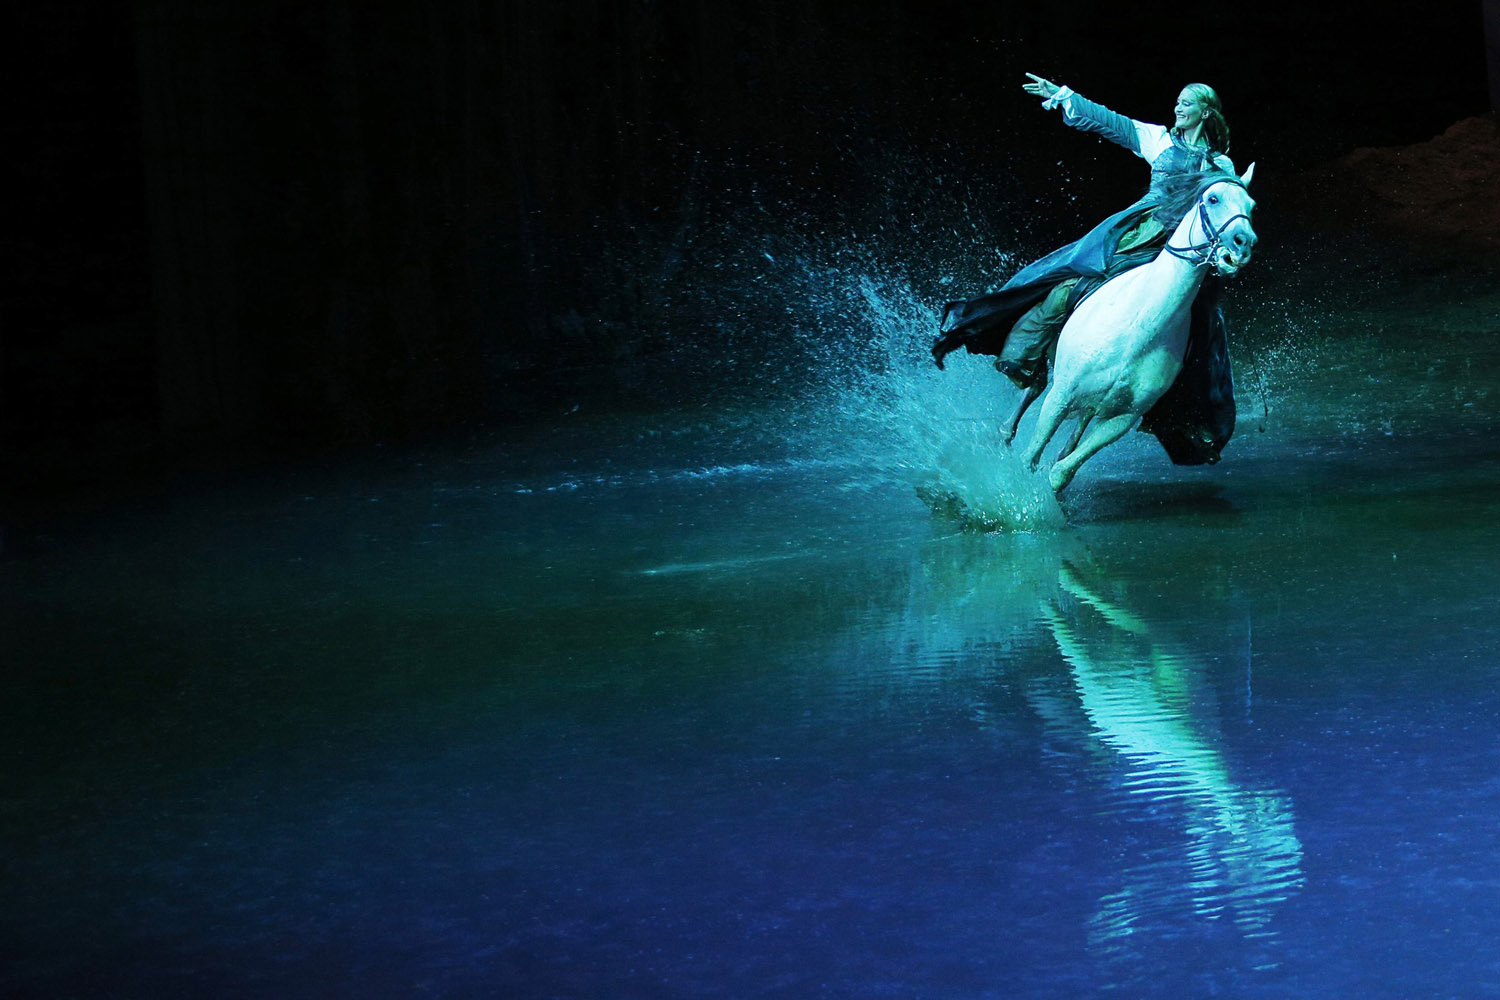 Horses and rider Elise Verdoncq perform during a "sneak peek" performance of Cavalia's show "Odysseo" in Somerville